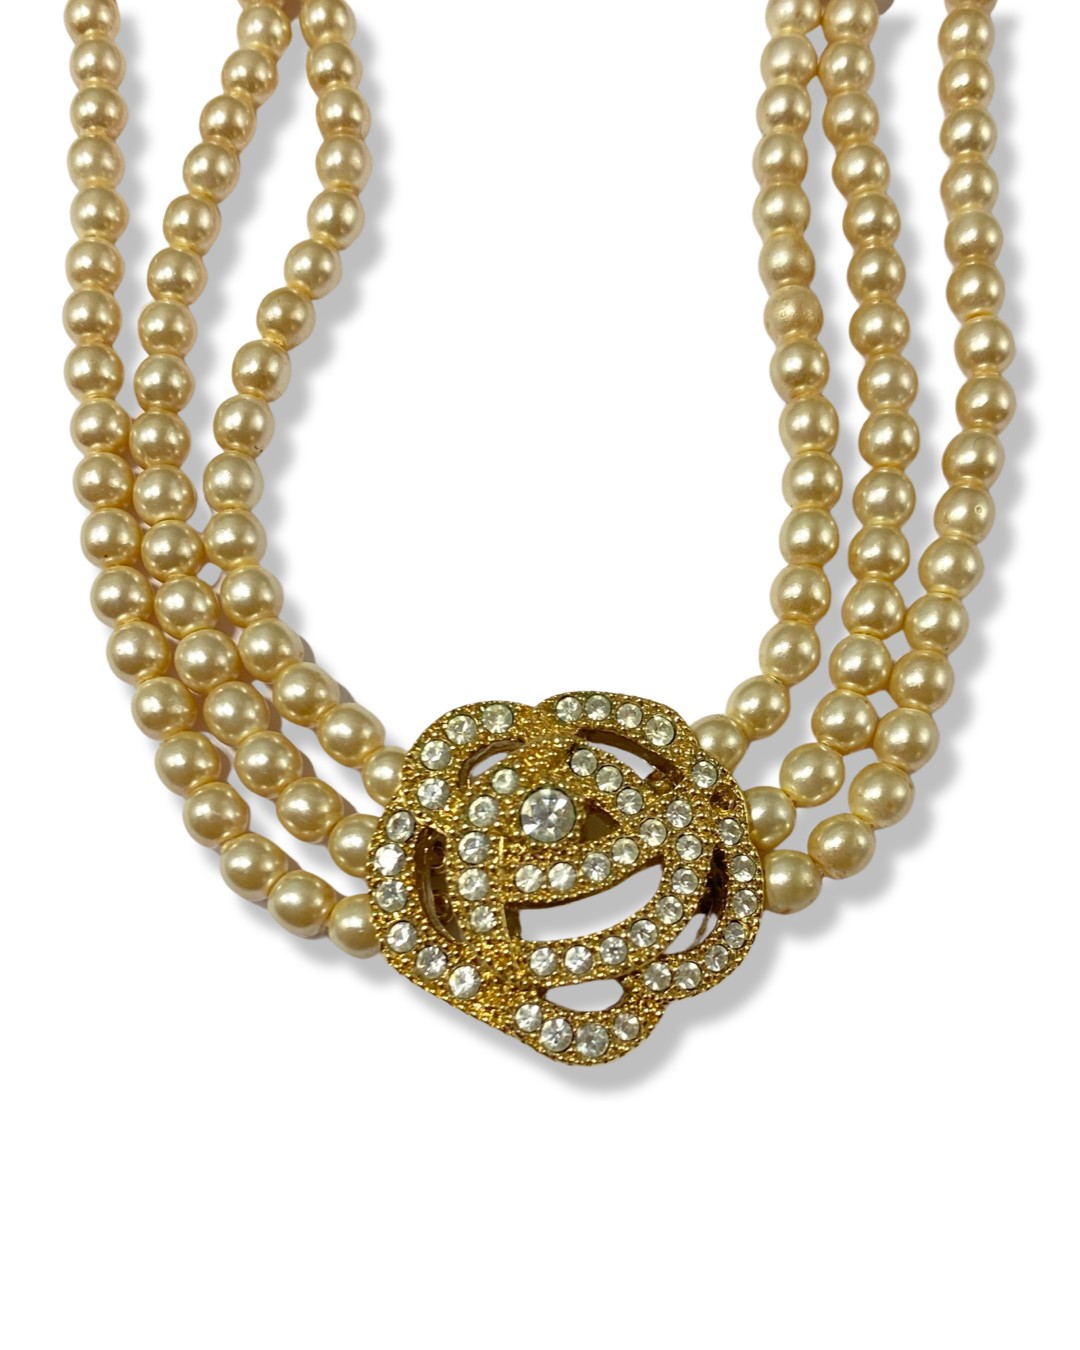 Christian Dior three row pearl necklace with floral centre pendant which is embellished with CZ - Image 2 of 3